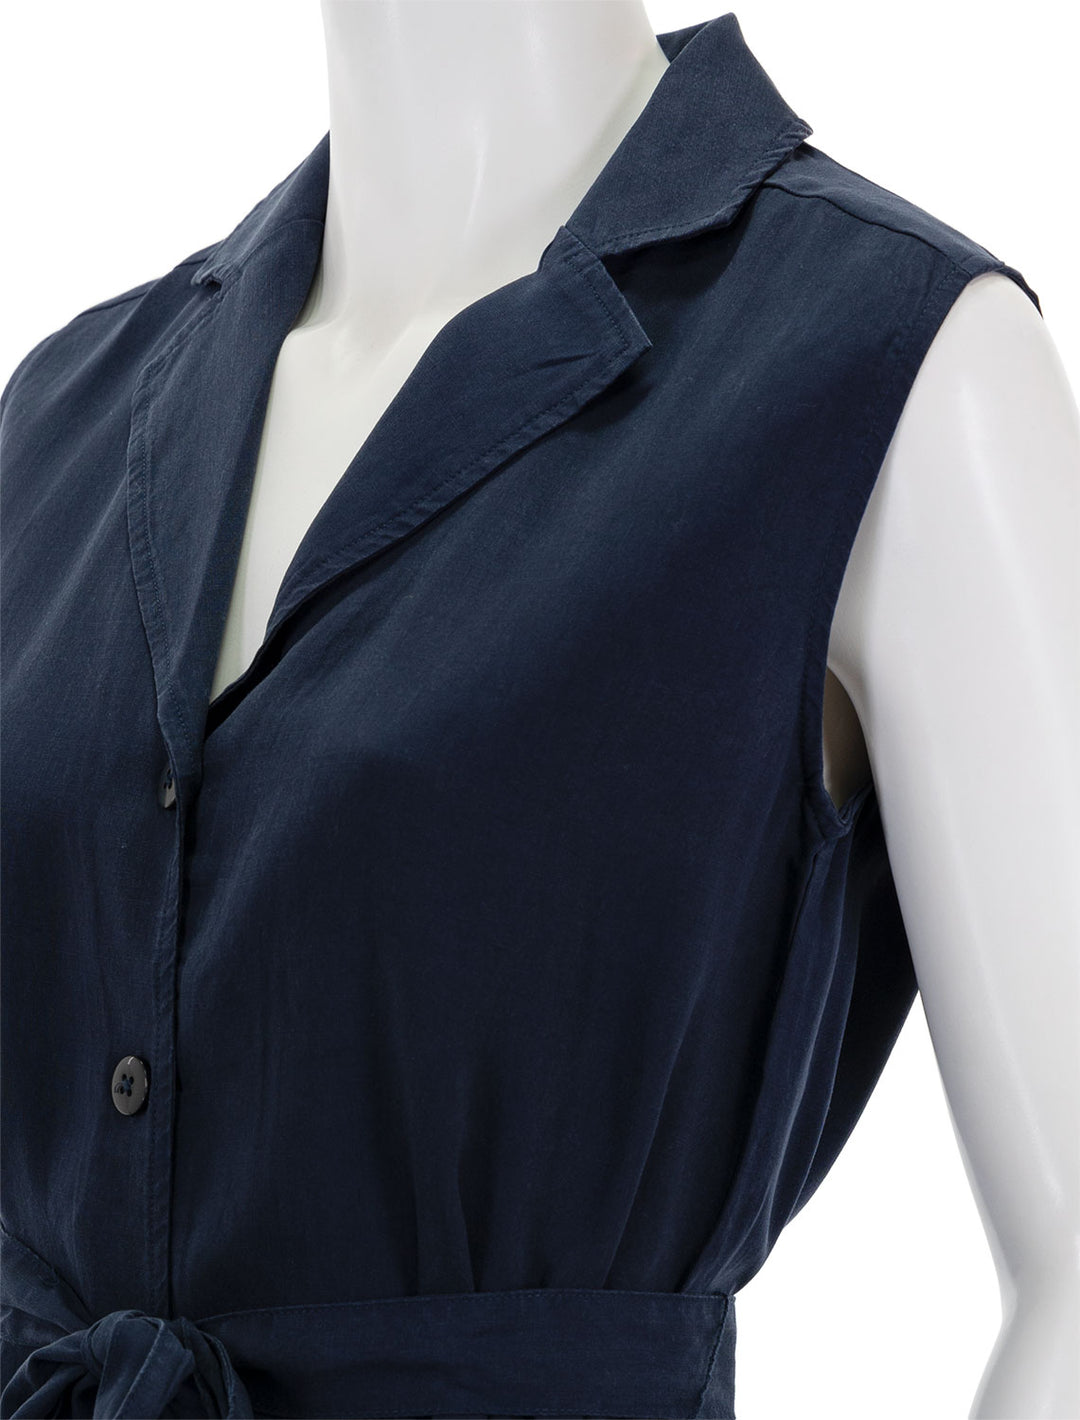 Close-up view of Splendid's alessi romper in navy.